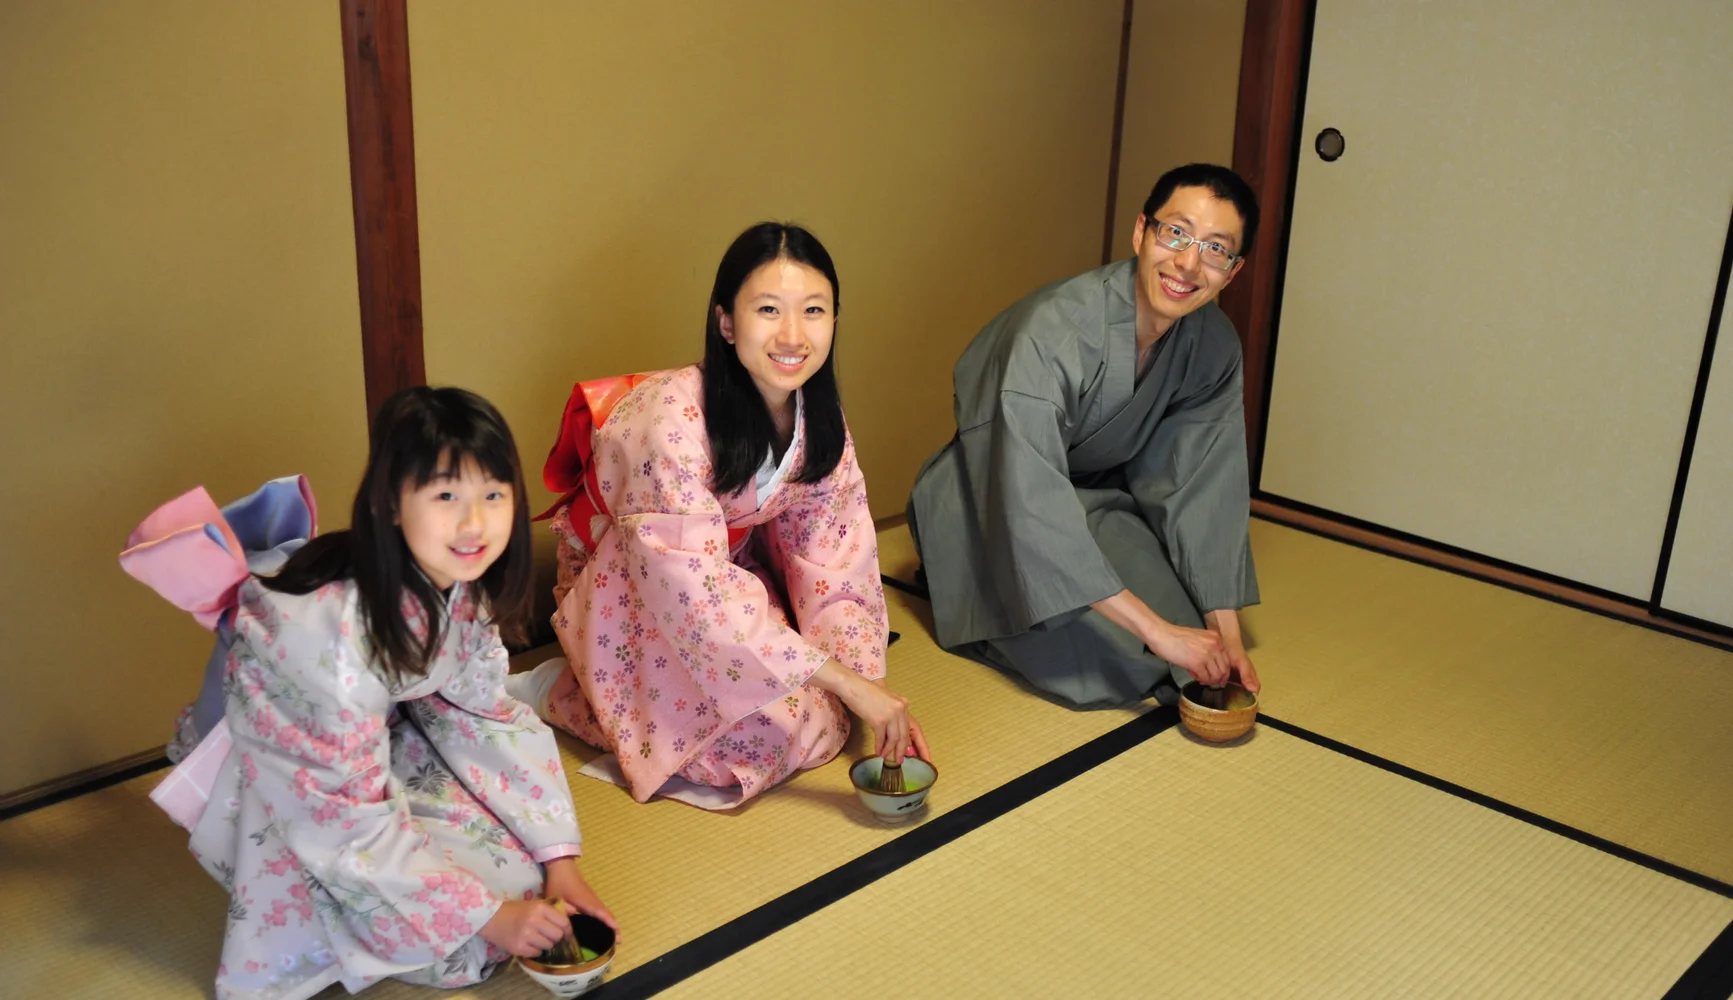 Authentic Tea Ceremony by a master of Urasenke school, Kyoto